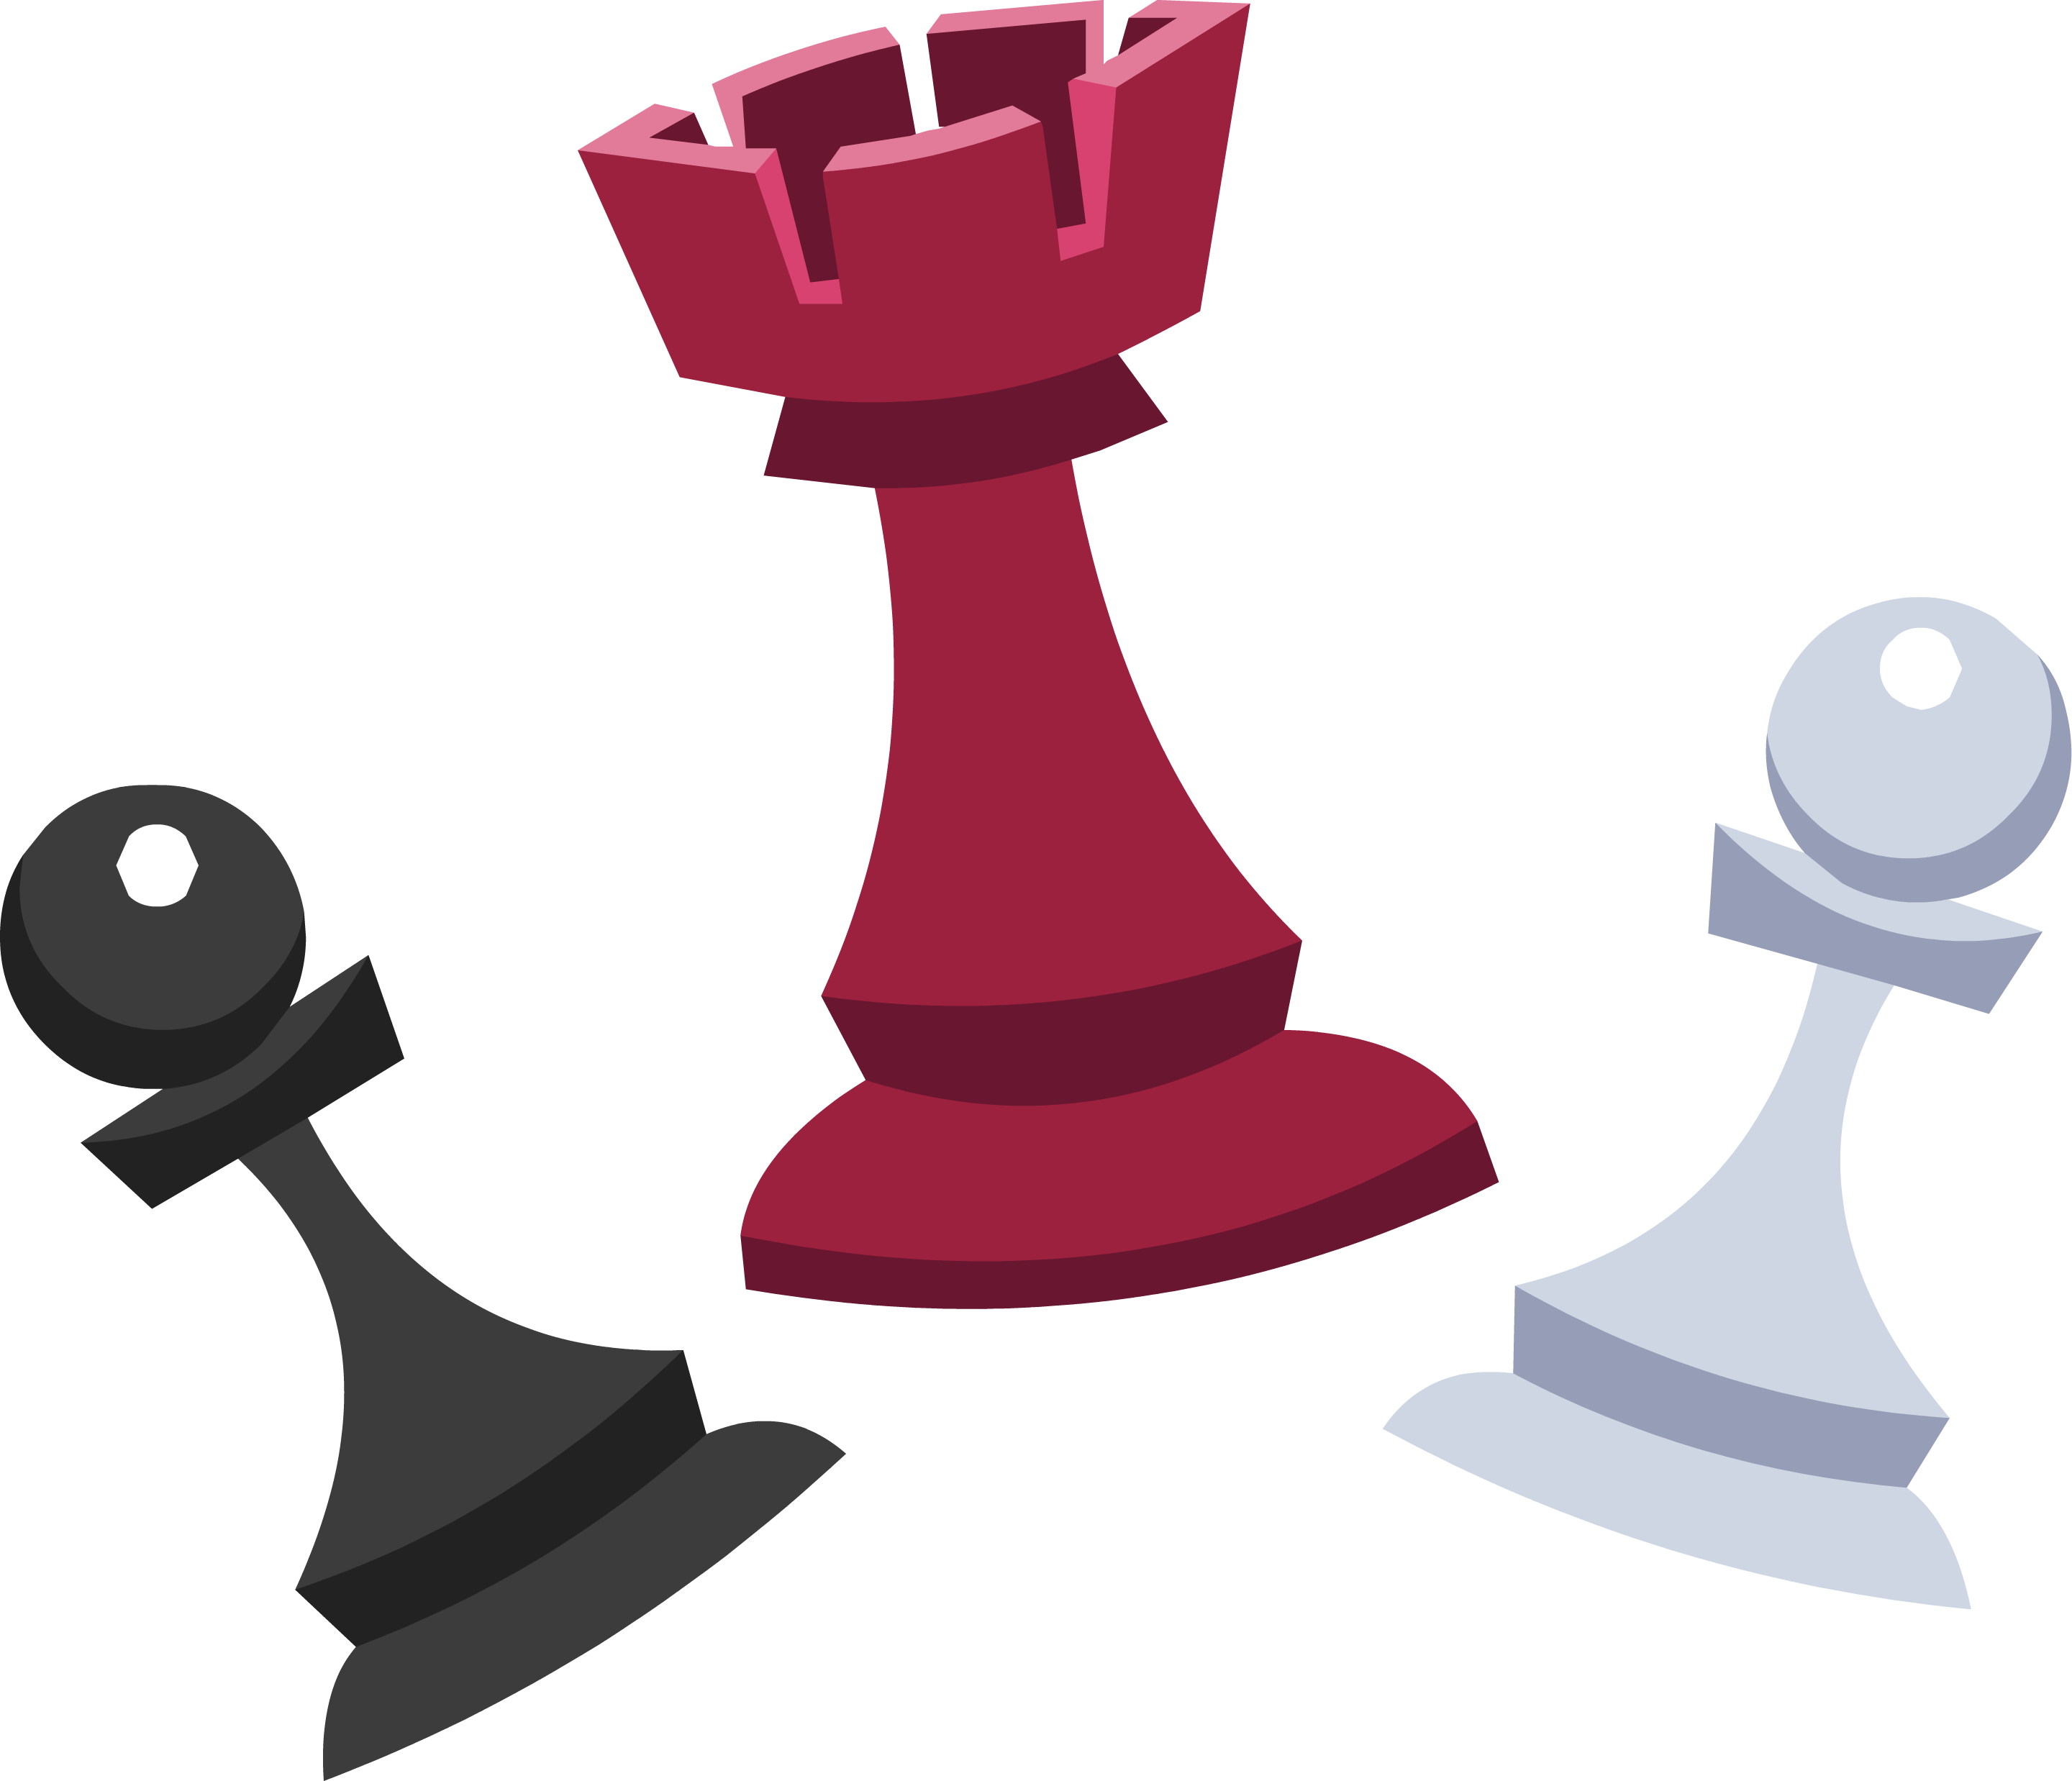 Chess PNG image transparent image download, size: 3346x1363px